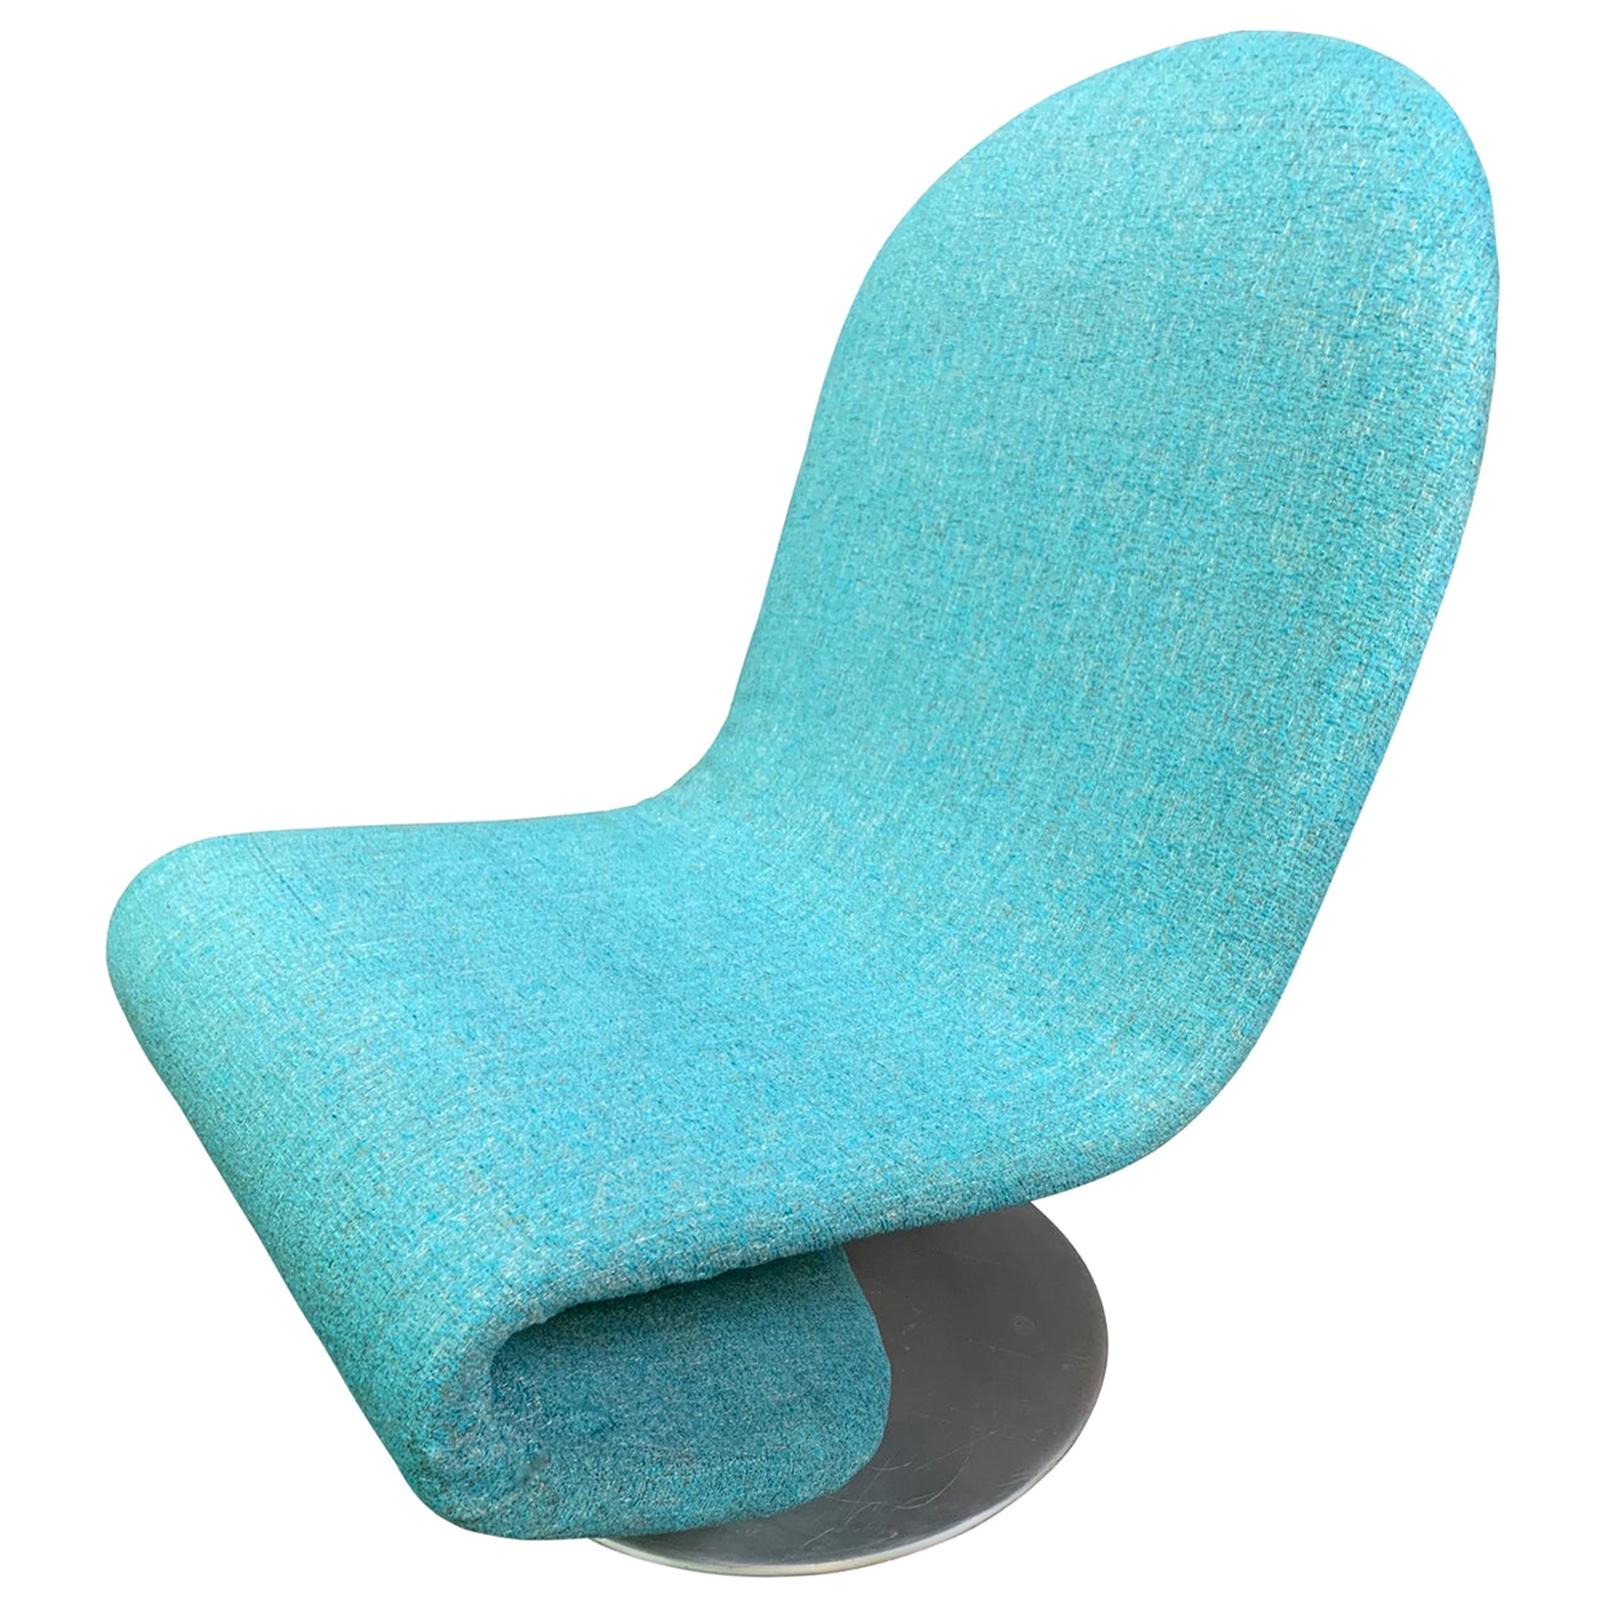 Vintage Danish Mid-Century Modern "System 1-2-3" Lounge Chair by Verner Panton For Sale